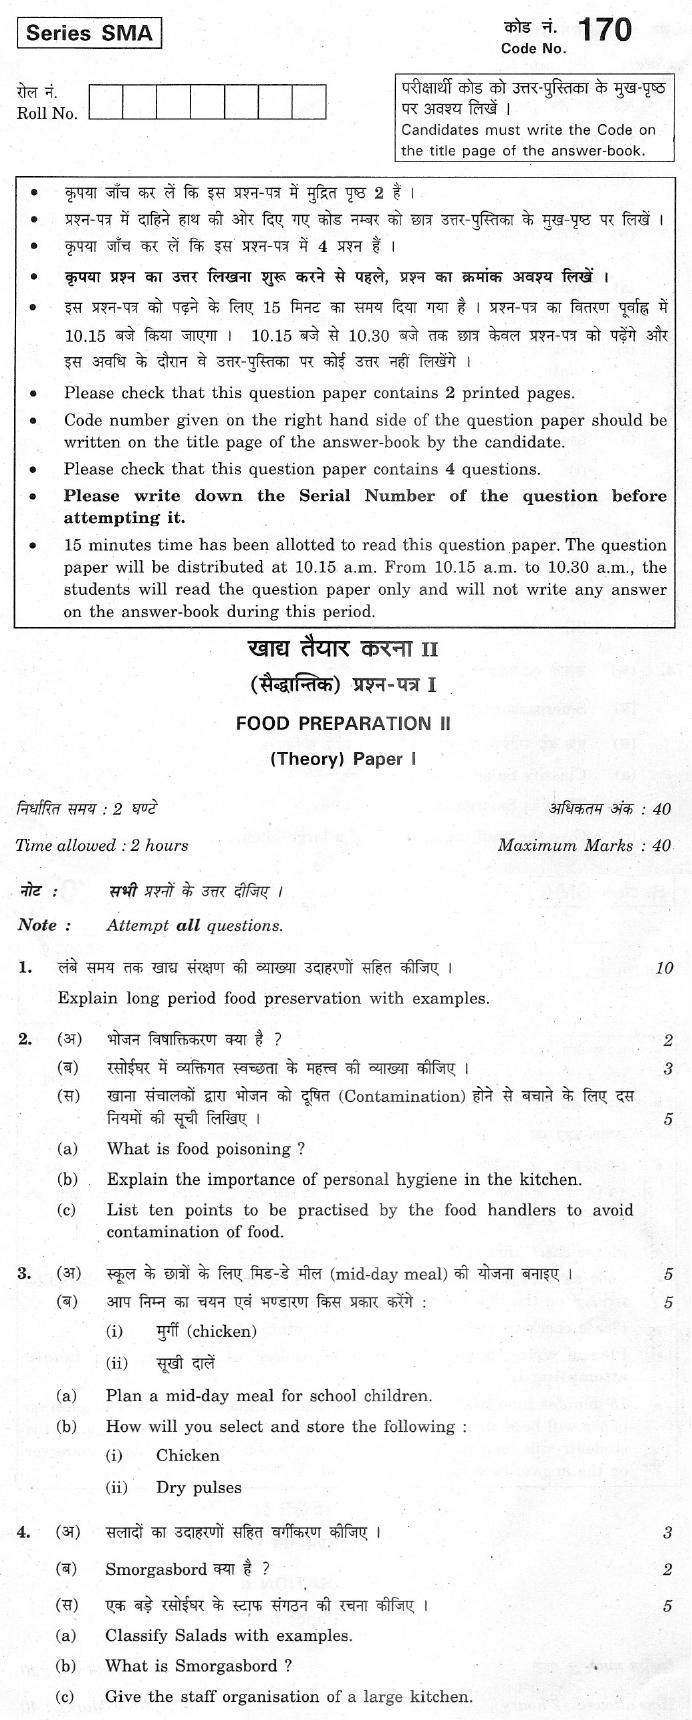 CBSE Class XII Previous Year Question Paper 2012 Food Preperation II Paper I